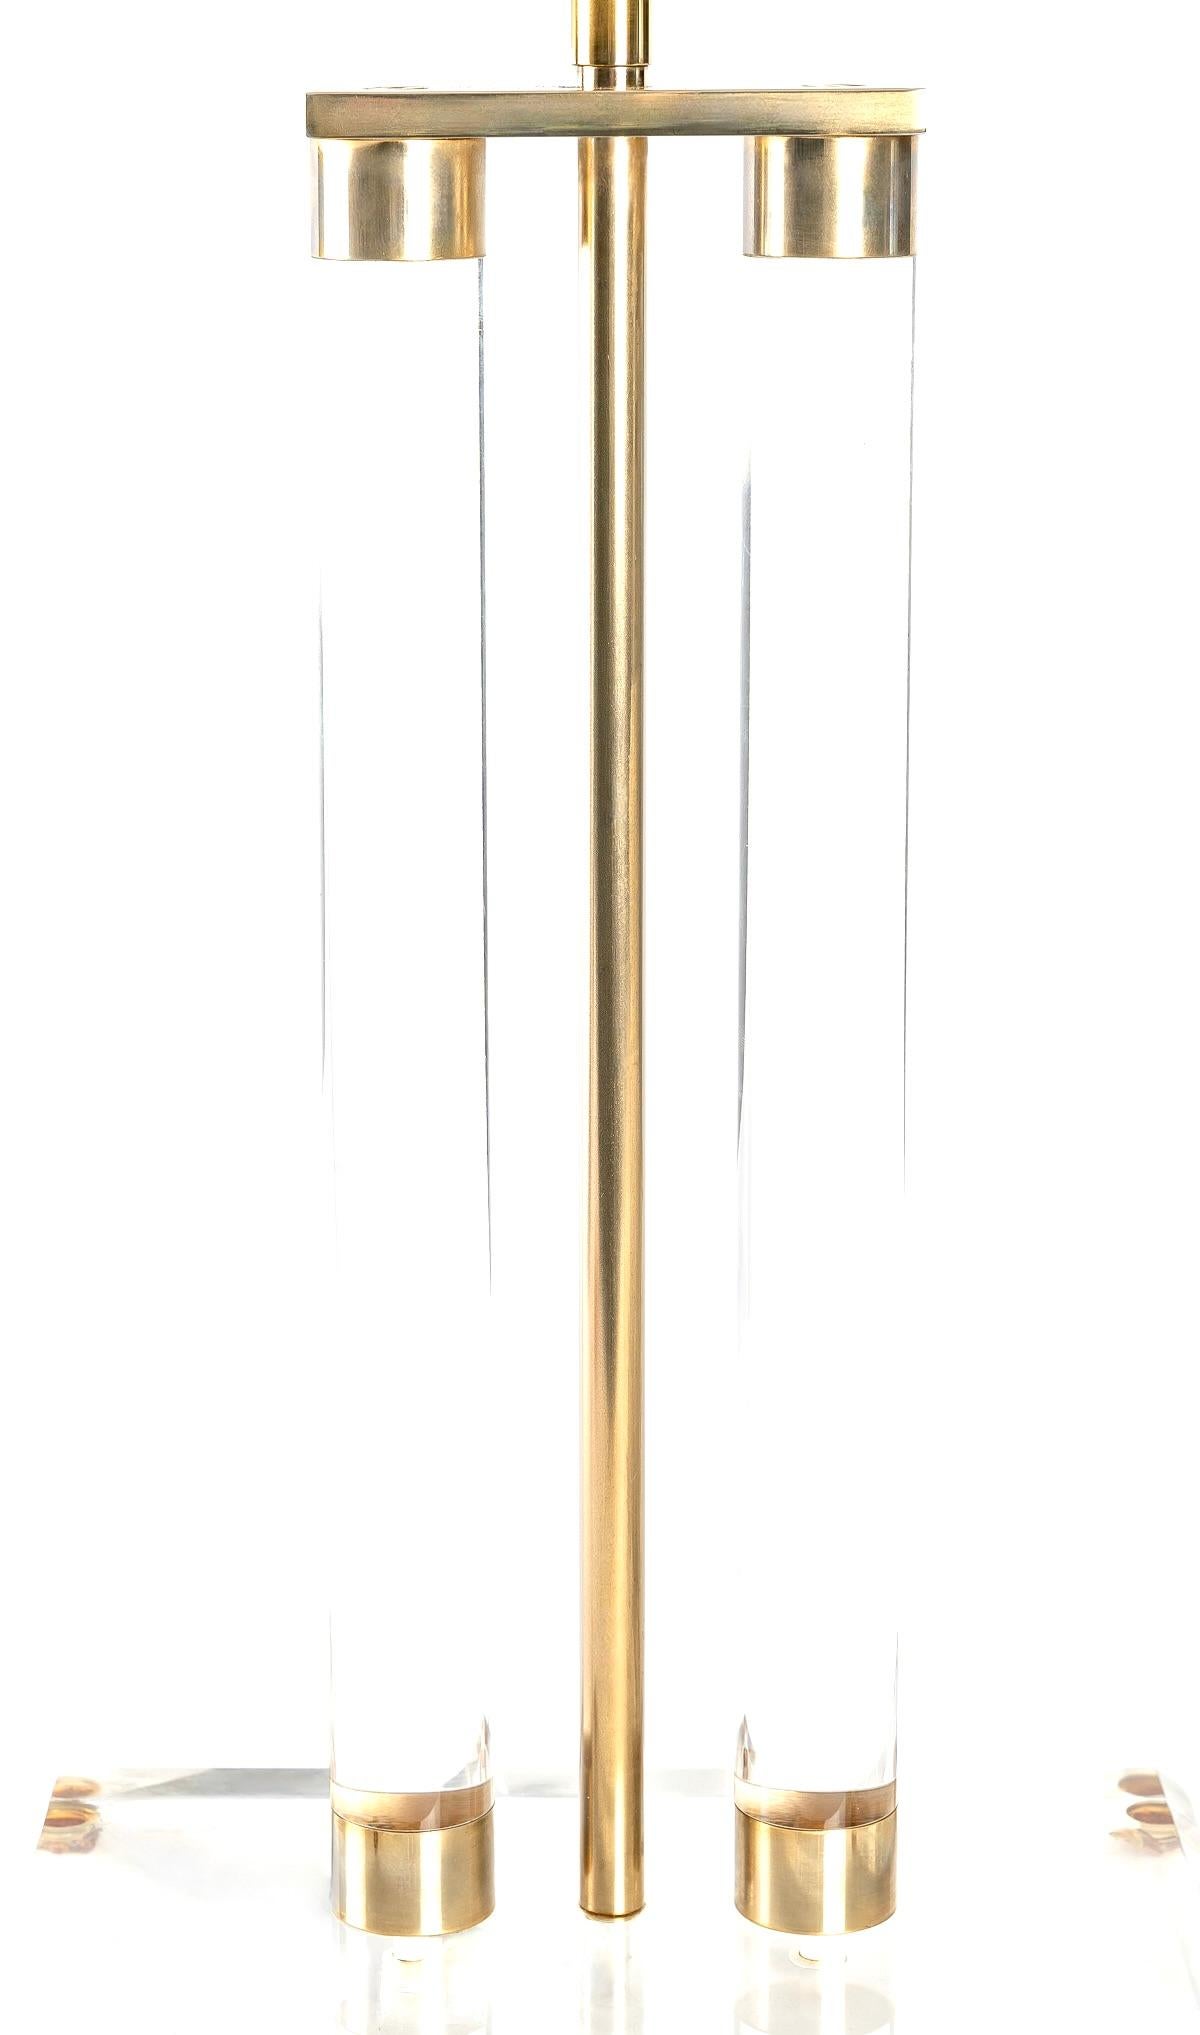 Altuglas lamp 1970 by Maison Roche
Composed of a rectangular base in altuglas on which rest two cylindrical rods in altuglas fixed on the lower and upper parts of a brass circle.
The center of the two cylindrical rods is adorned with a round rod